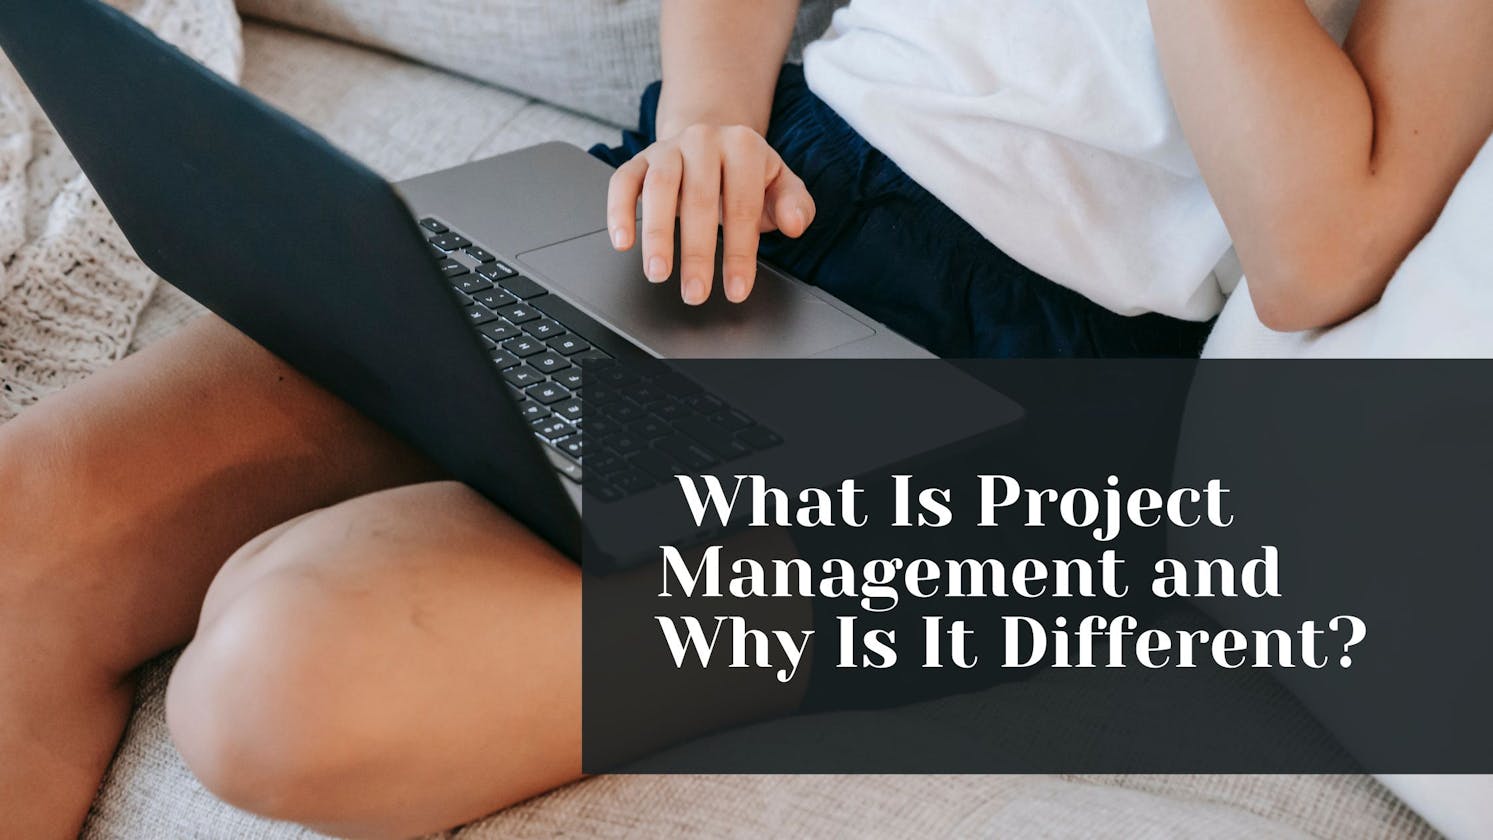 Quang Regan – What Is Project Management and Why Is It Different